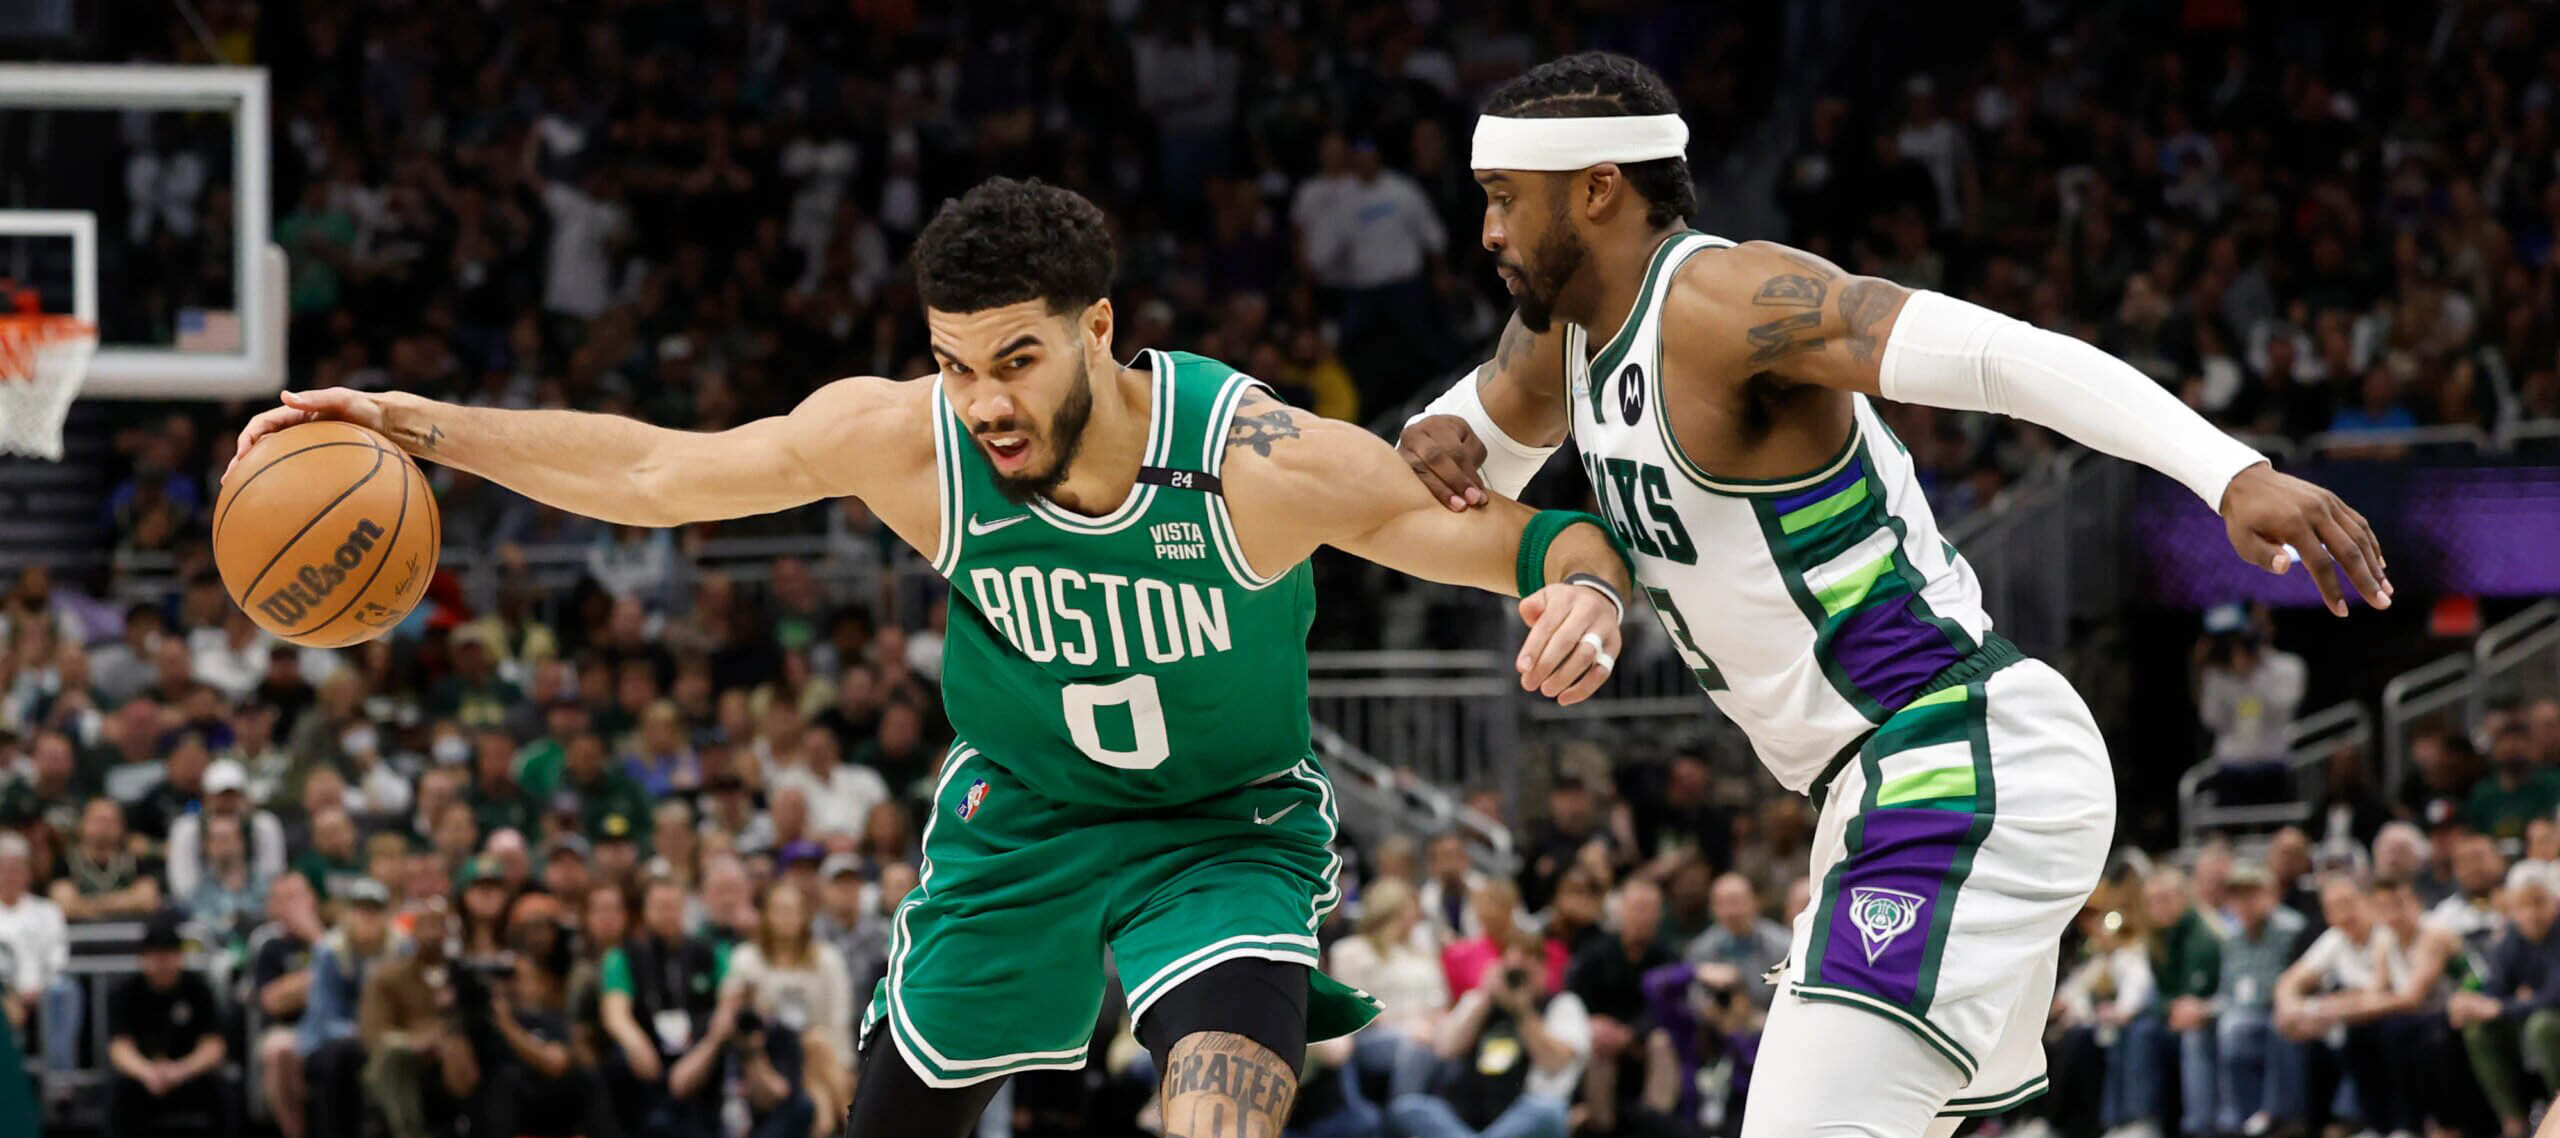 2022 NBA Championship Betting Predictions of the Possible Finals Matchups to Look For